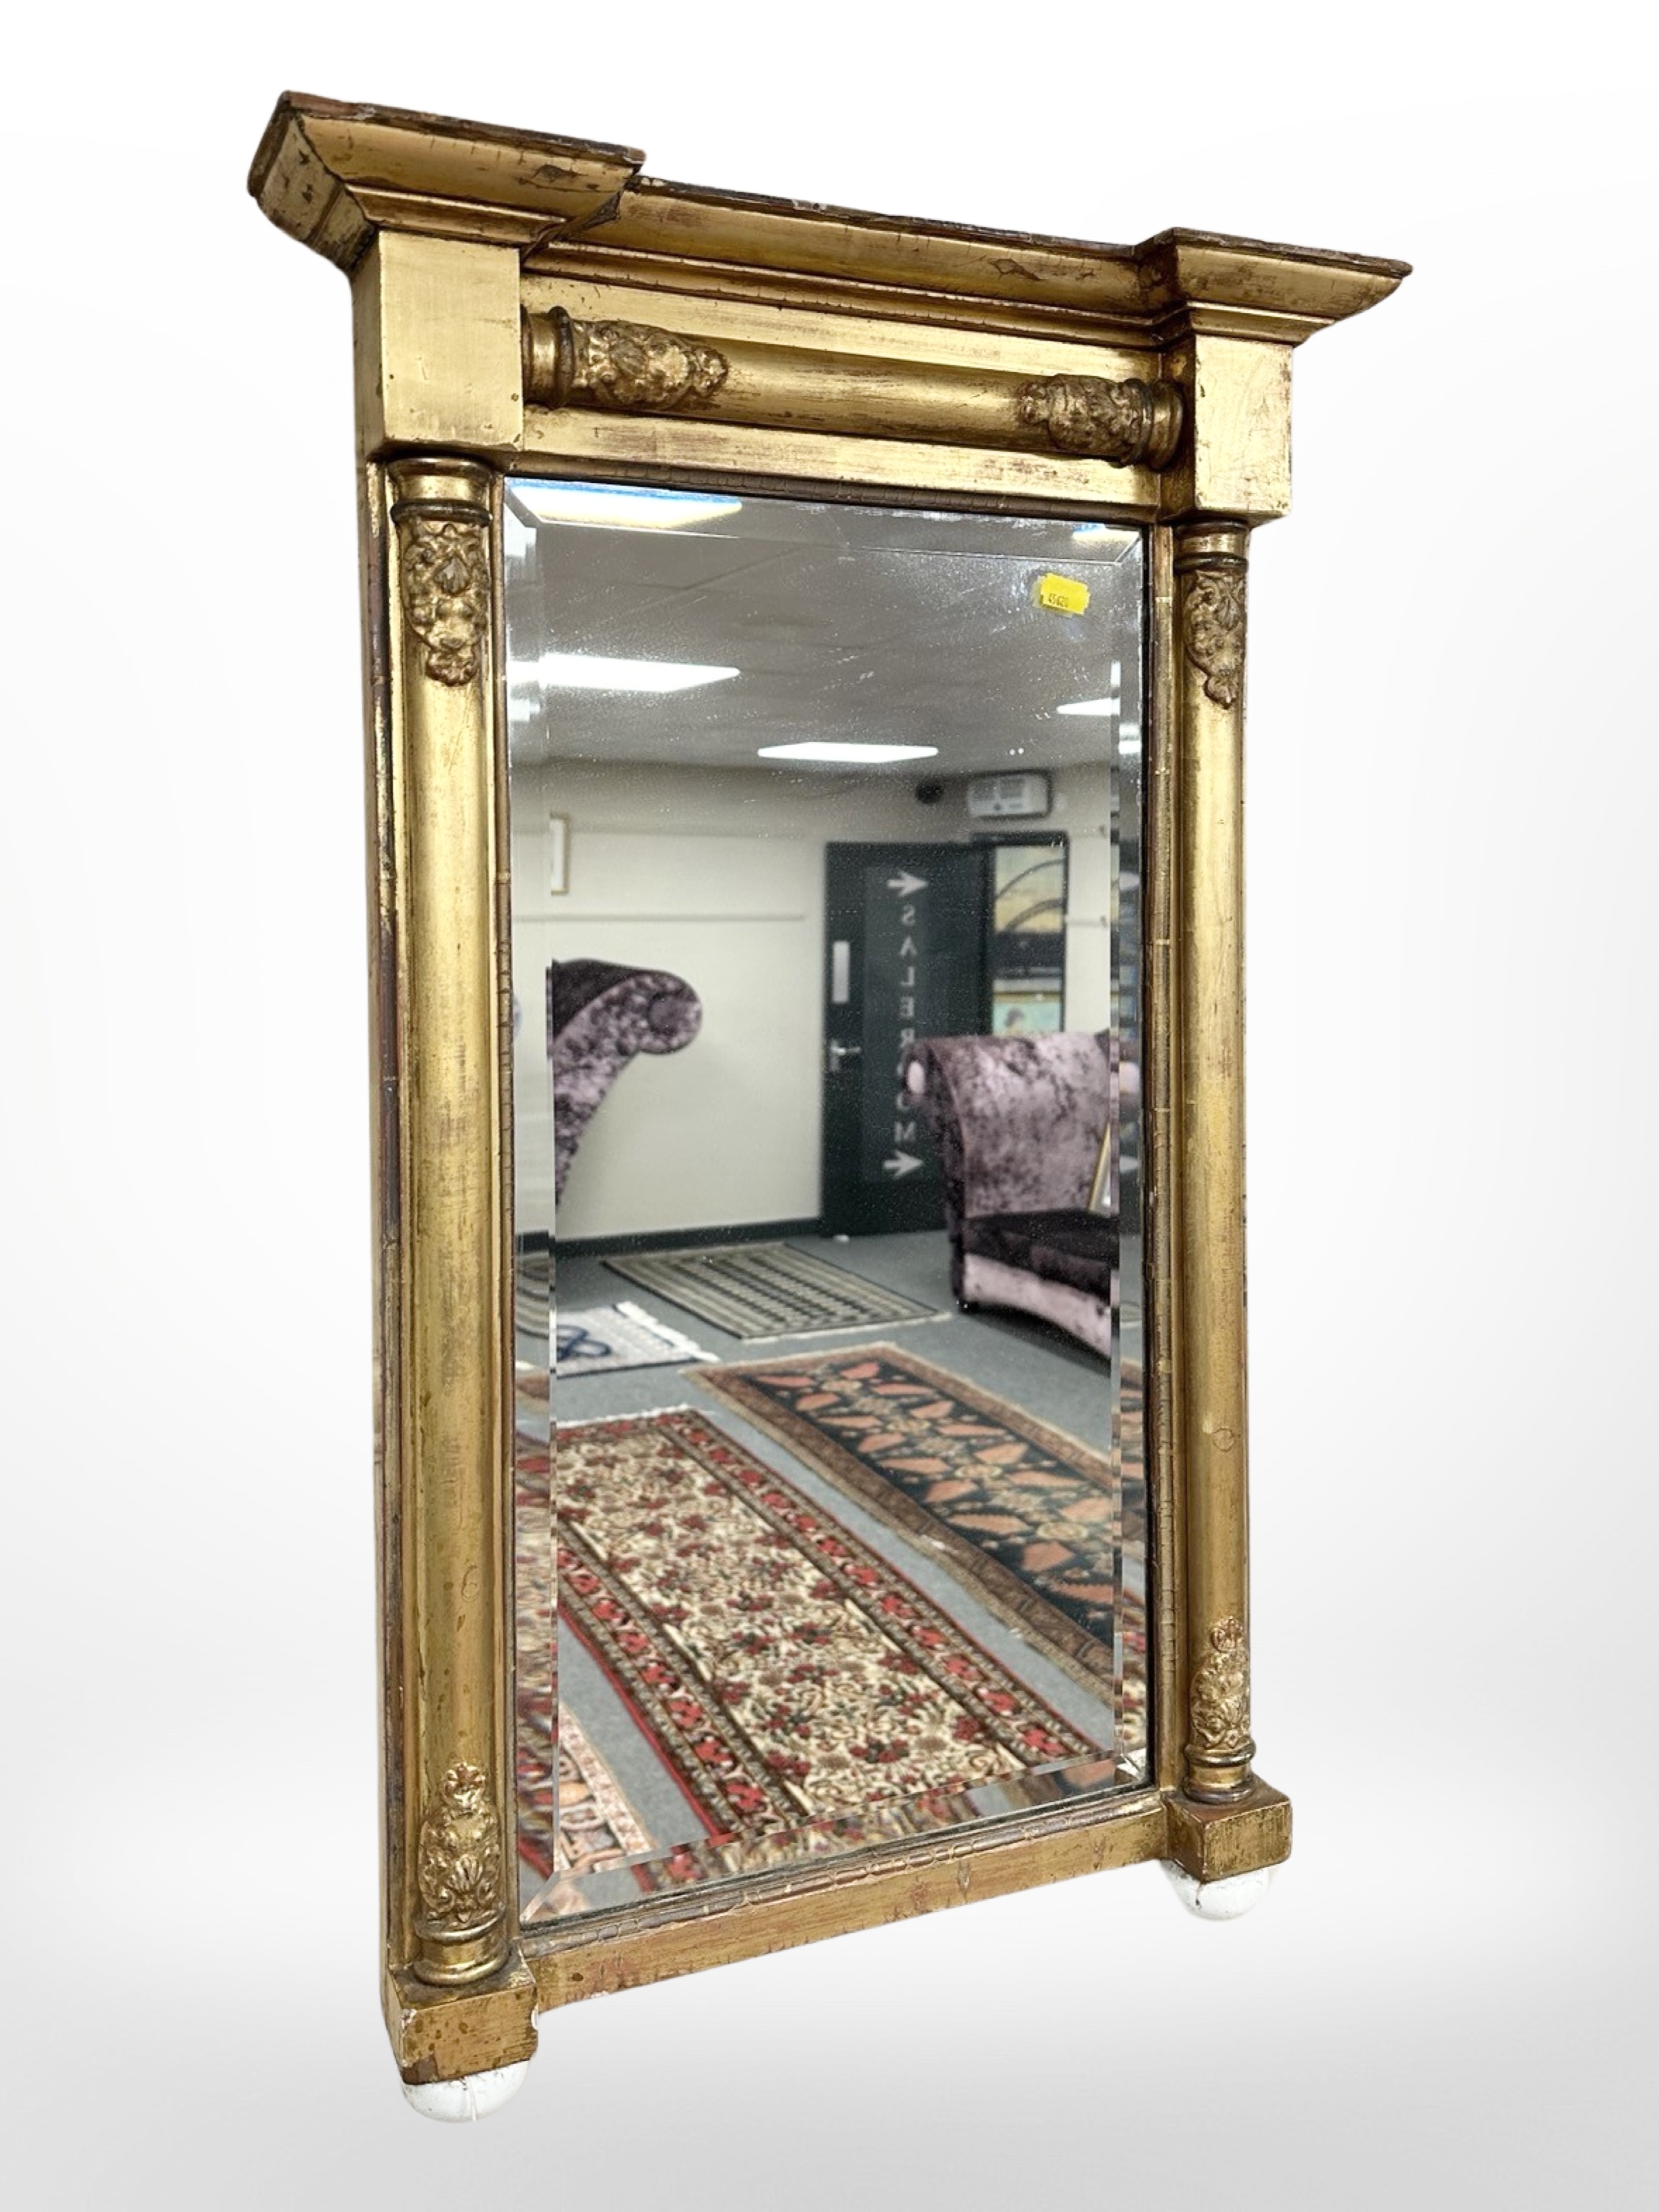 A Regency giltwood and gesso pier glass mirror,